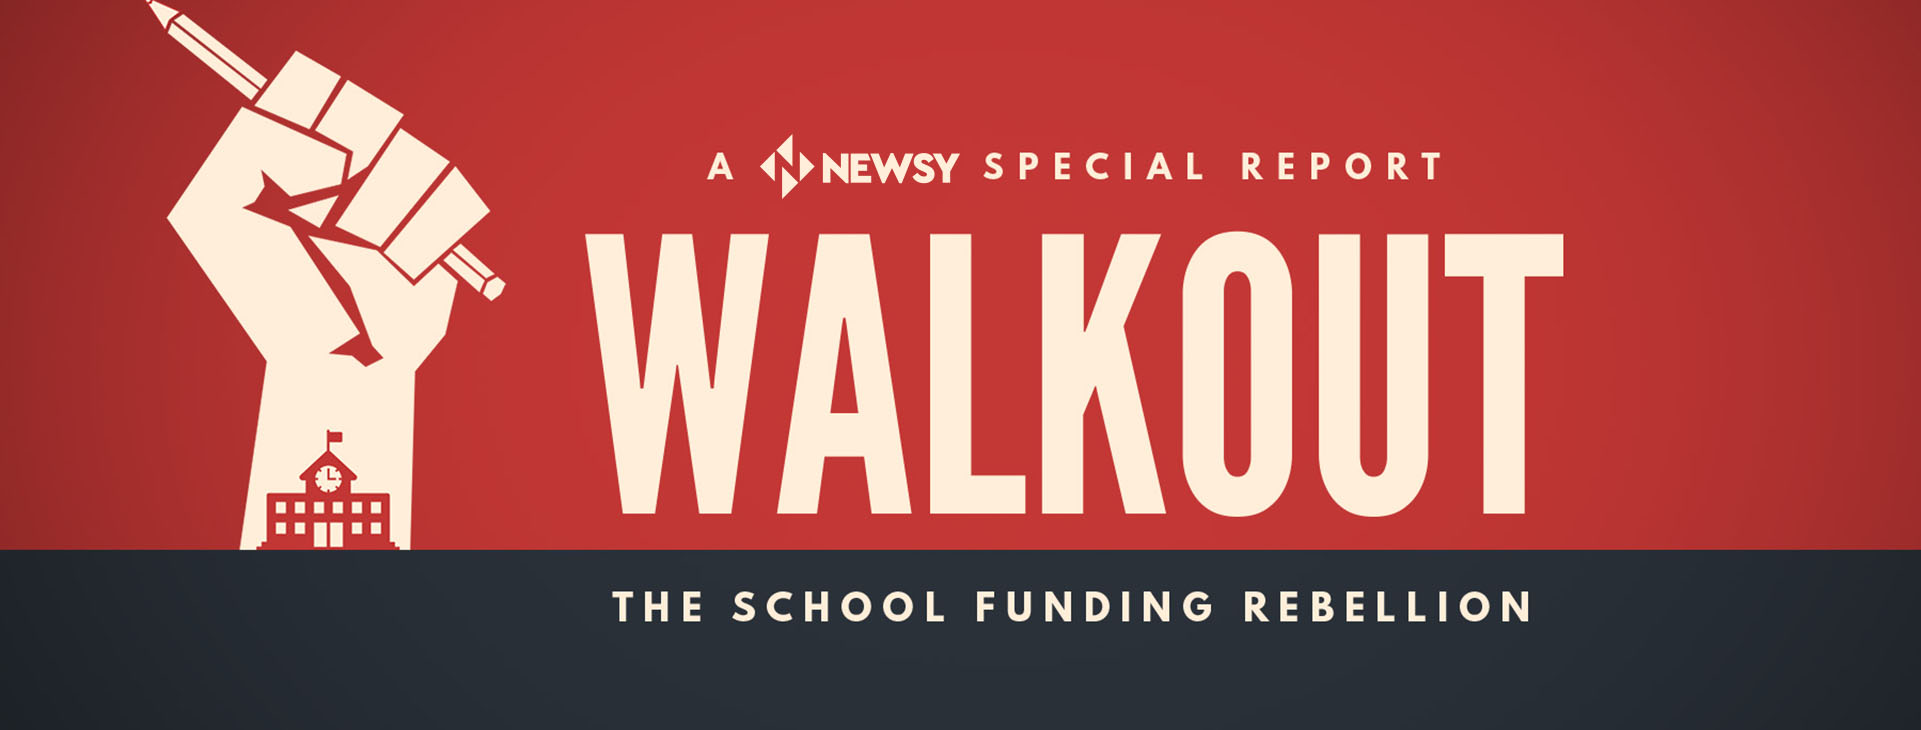 Walkout: The School Funding Rebellion Newsy special report logo